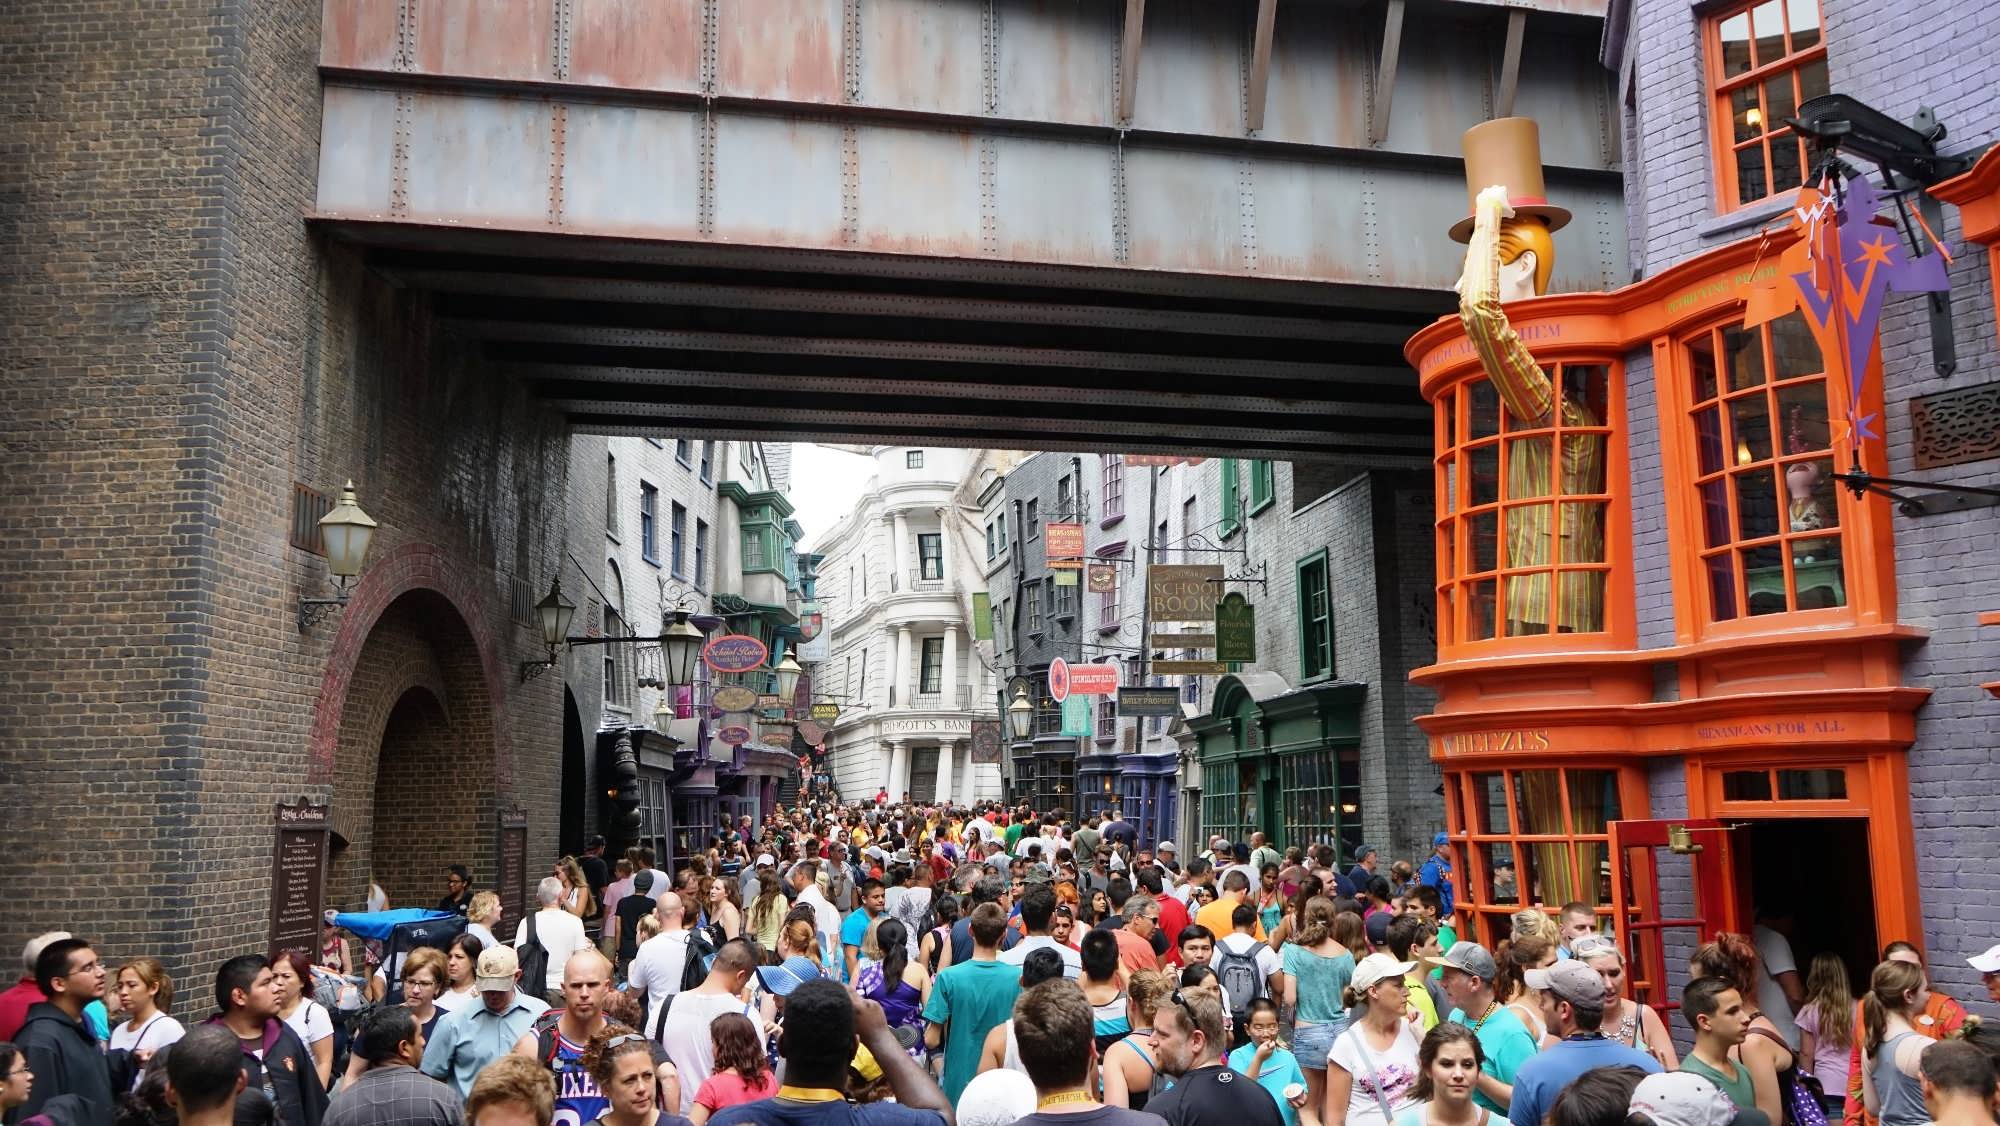 Wizarding World of Harry Potter: Only guaranteed ways to beat crowds